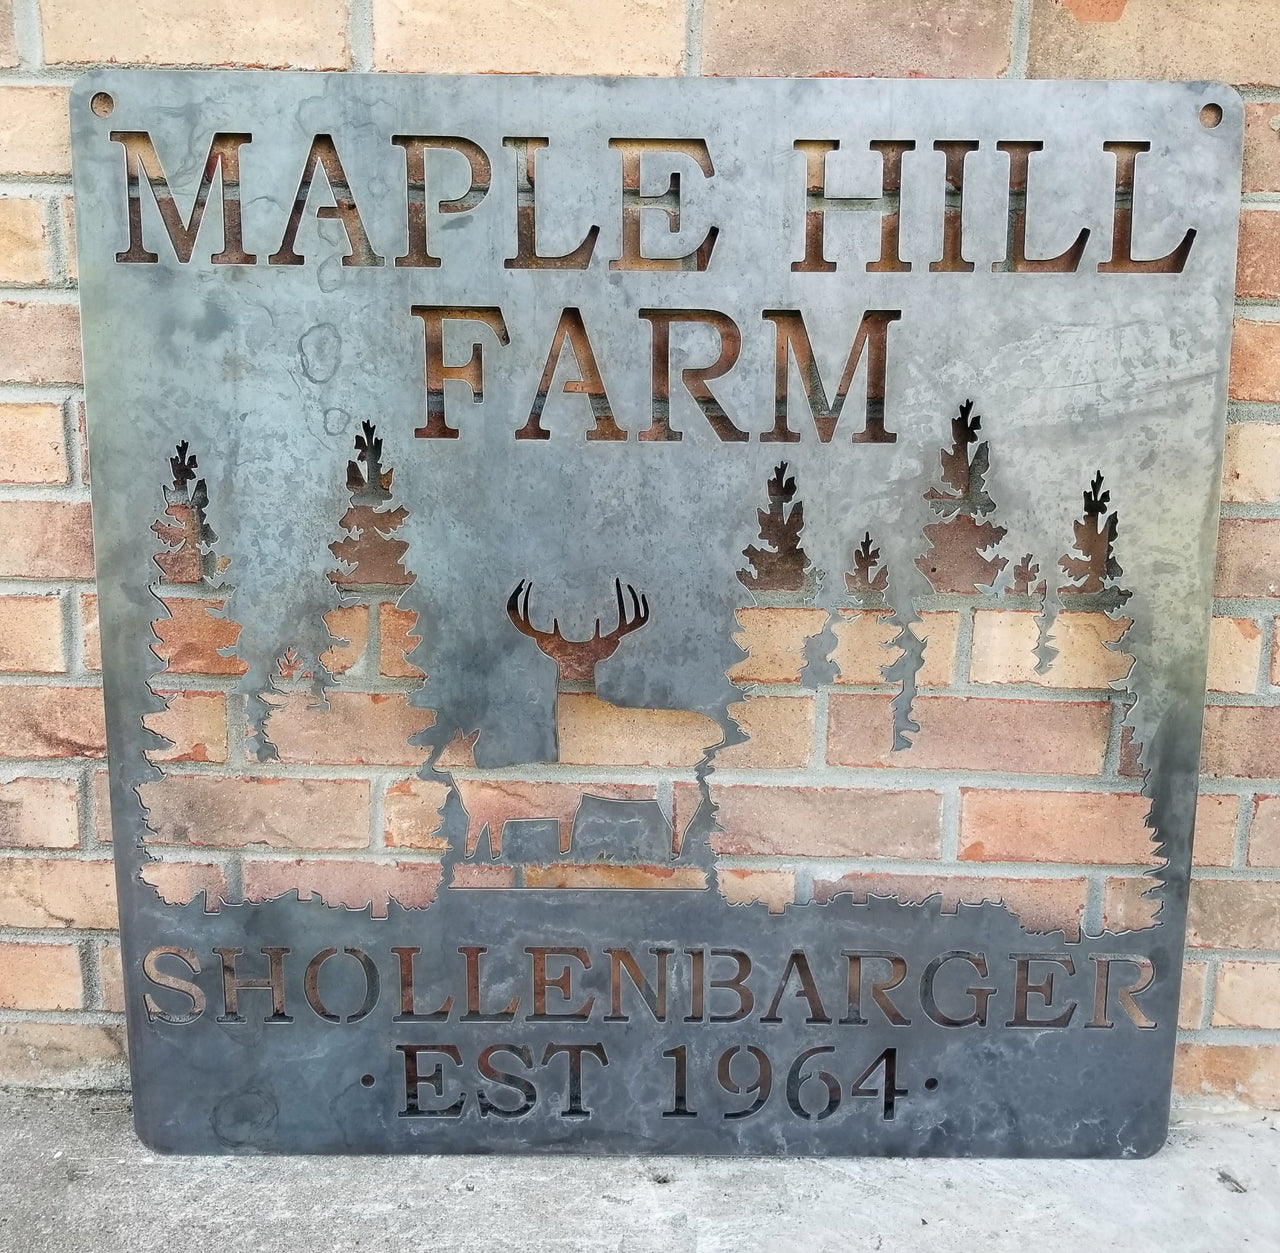 Personalized Rustic Wilderness Metal Sign - Maple Hill Farm - Customize Farm Name and Established Date